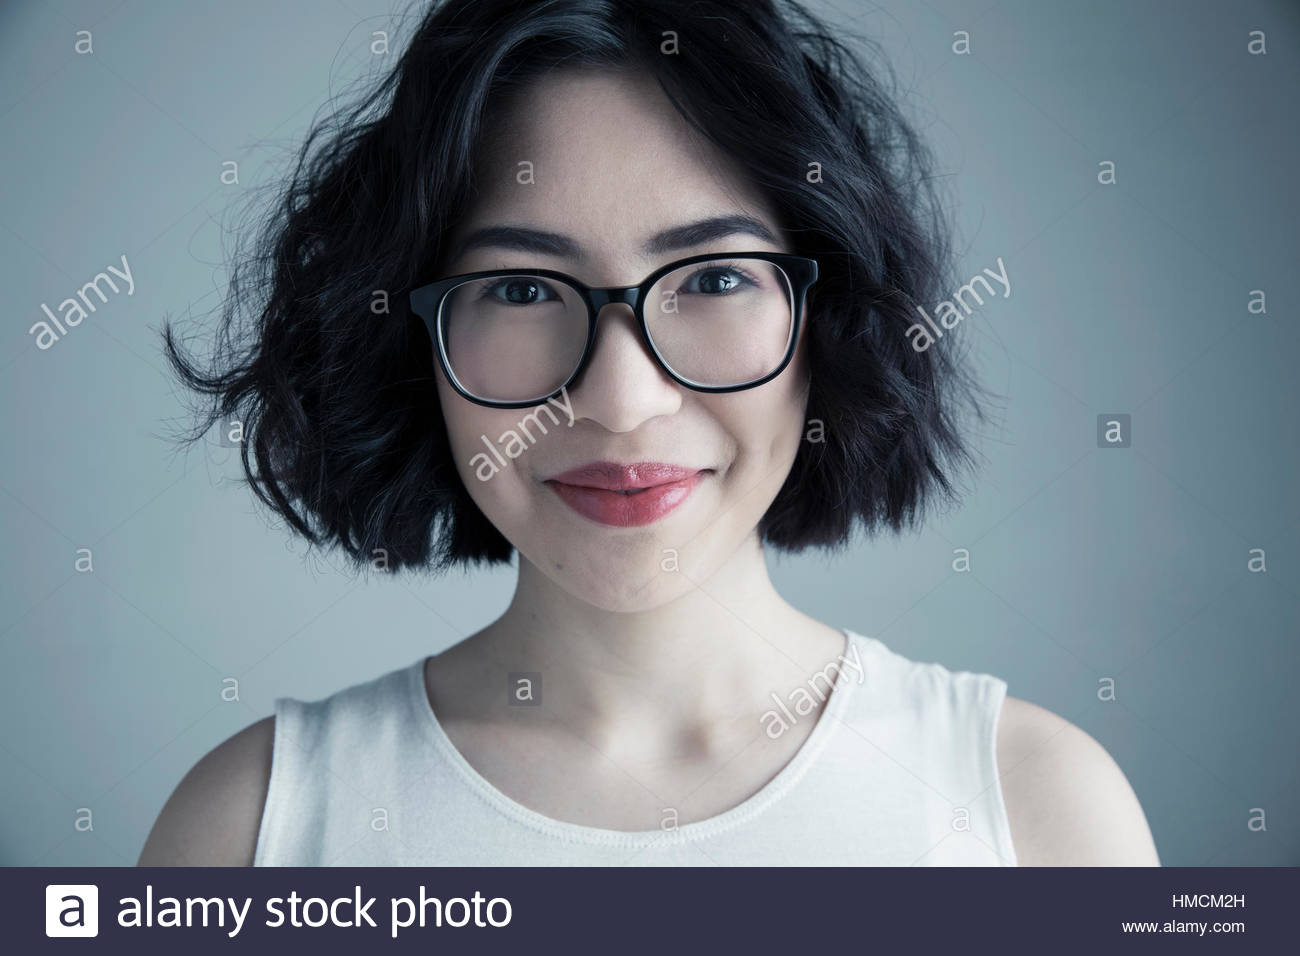 Close up portrait smiling mixed race young woman with black hair and eyeglasses Stock Photo